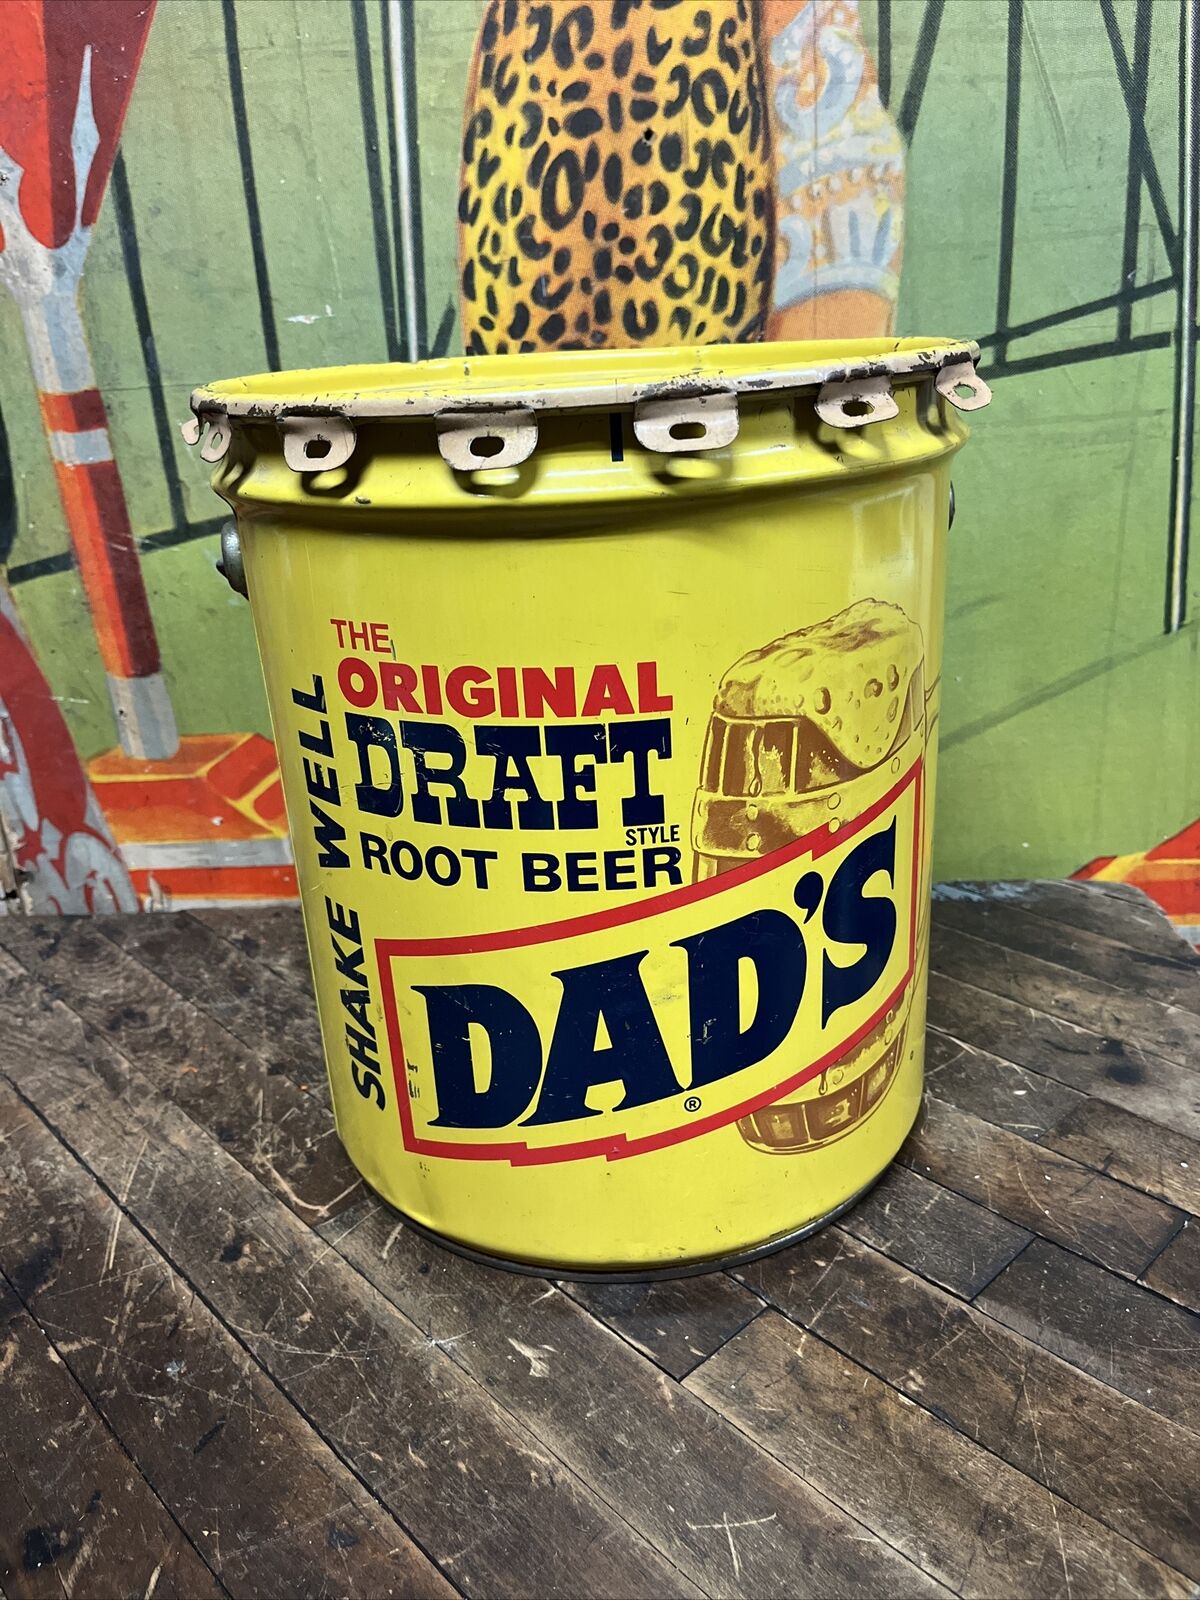 VINTAGE 1960 DADS ROOT BEER 5 GALLON SYRUP CAN DRUM SIGN COCA COLA 7UP PEPSI DP